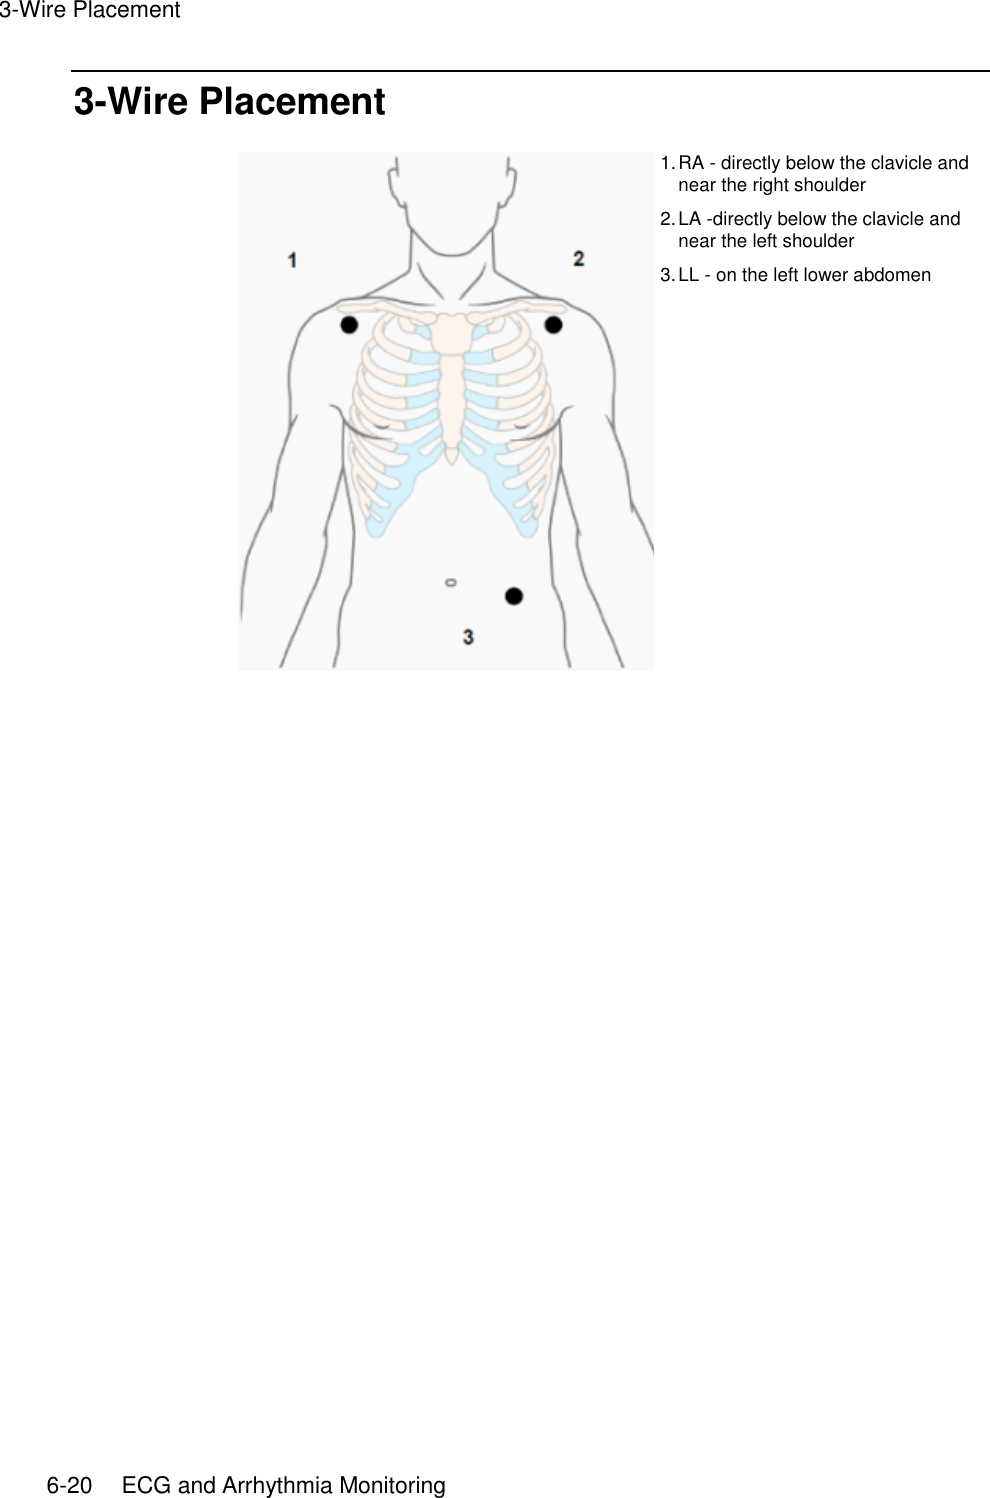 3-Wire Placement   6-20    ECG and Arrhythmia Monitoring 3-Wire Placement  1. RA - directly below the clavicle and near the right shoulder 2. LA -directly below the clavicle and near the left shoulder 3. LL - on the left lower abdomen   